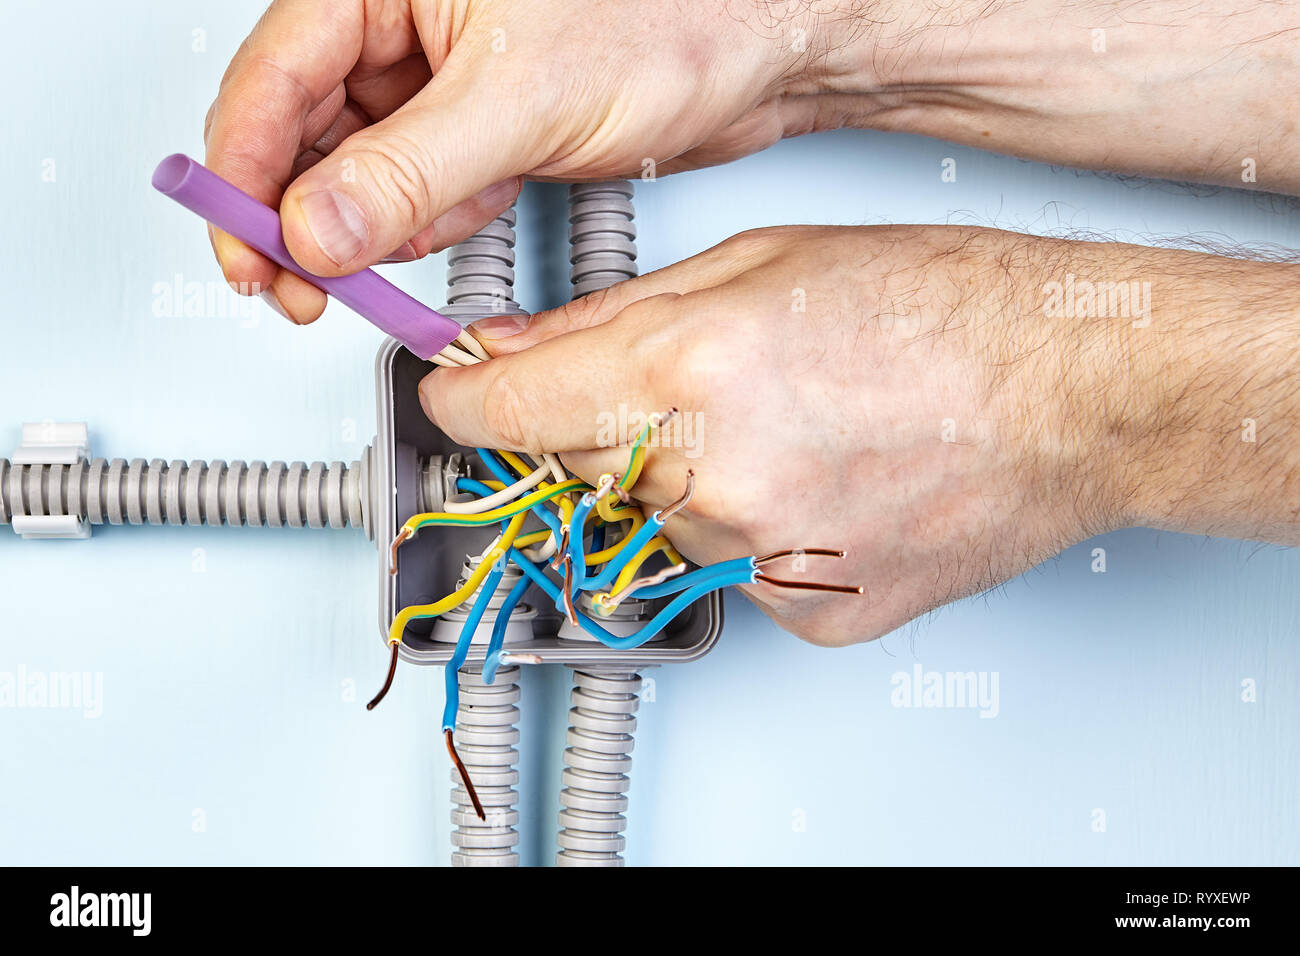 Electrician is using heat shrink tubing for joining ends of wire together for good contact. Stock Photo